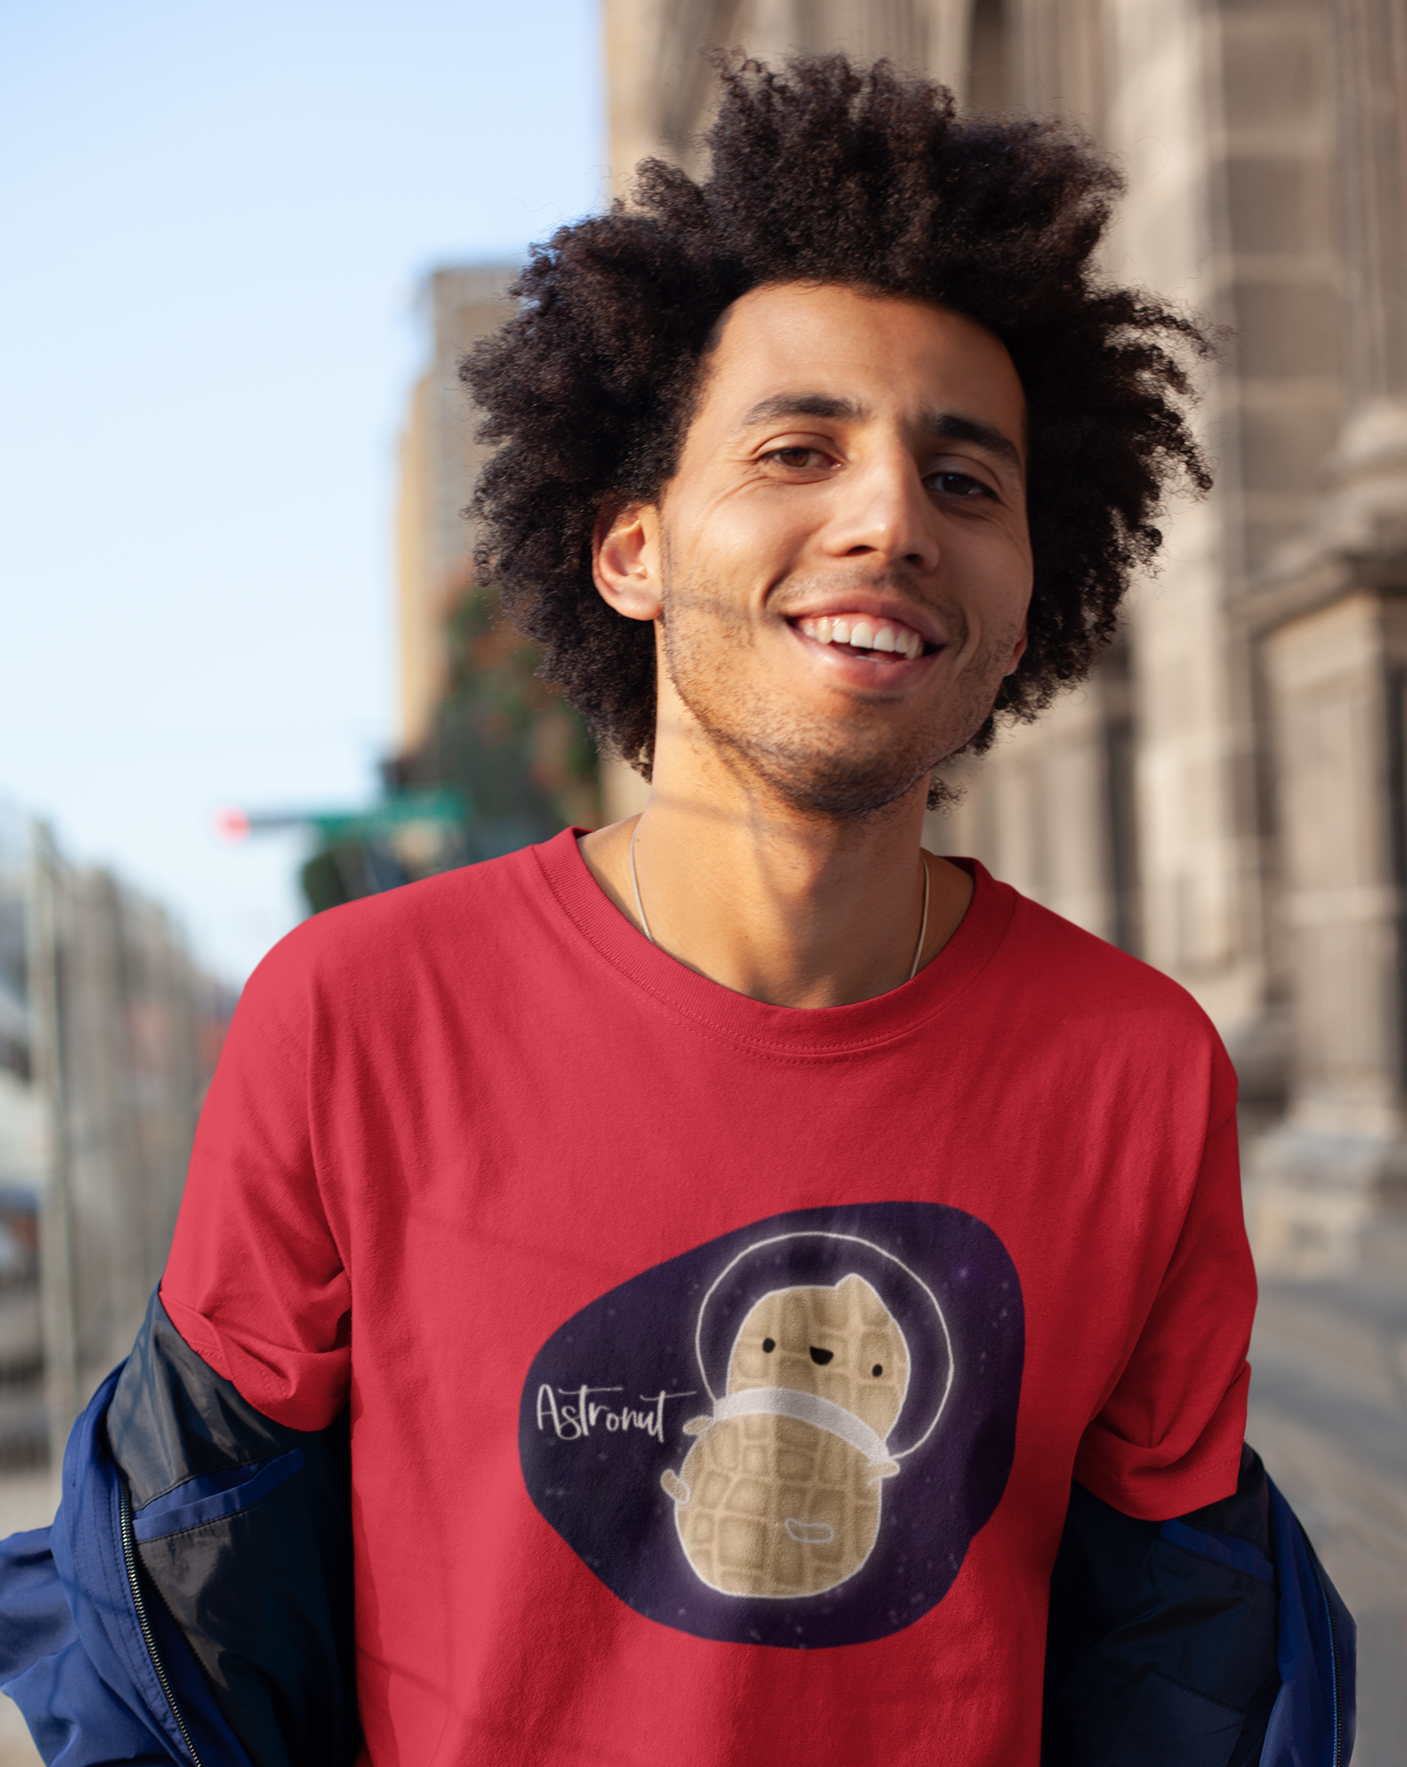 What do you get when you cross an astronaut and a peanut?... an Astronut! Show off your sense of humor in this funny, galactic, out of this world cotton t-shirt. Makes the perfect gift for your punny uncle or for your friend who can't stop making dad jokes!